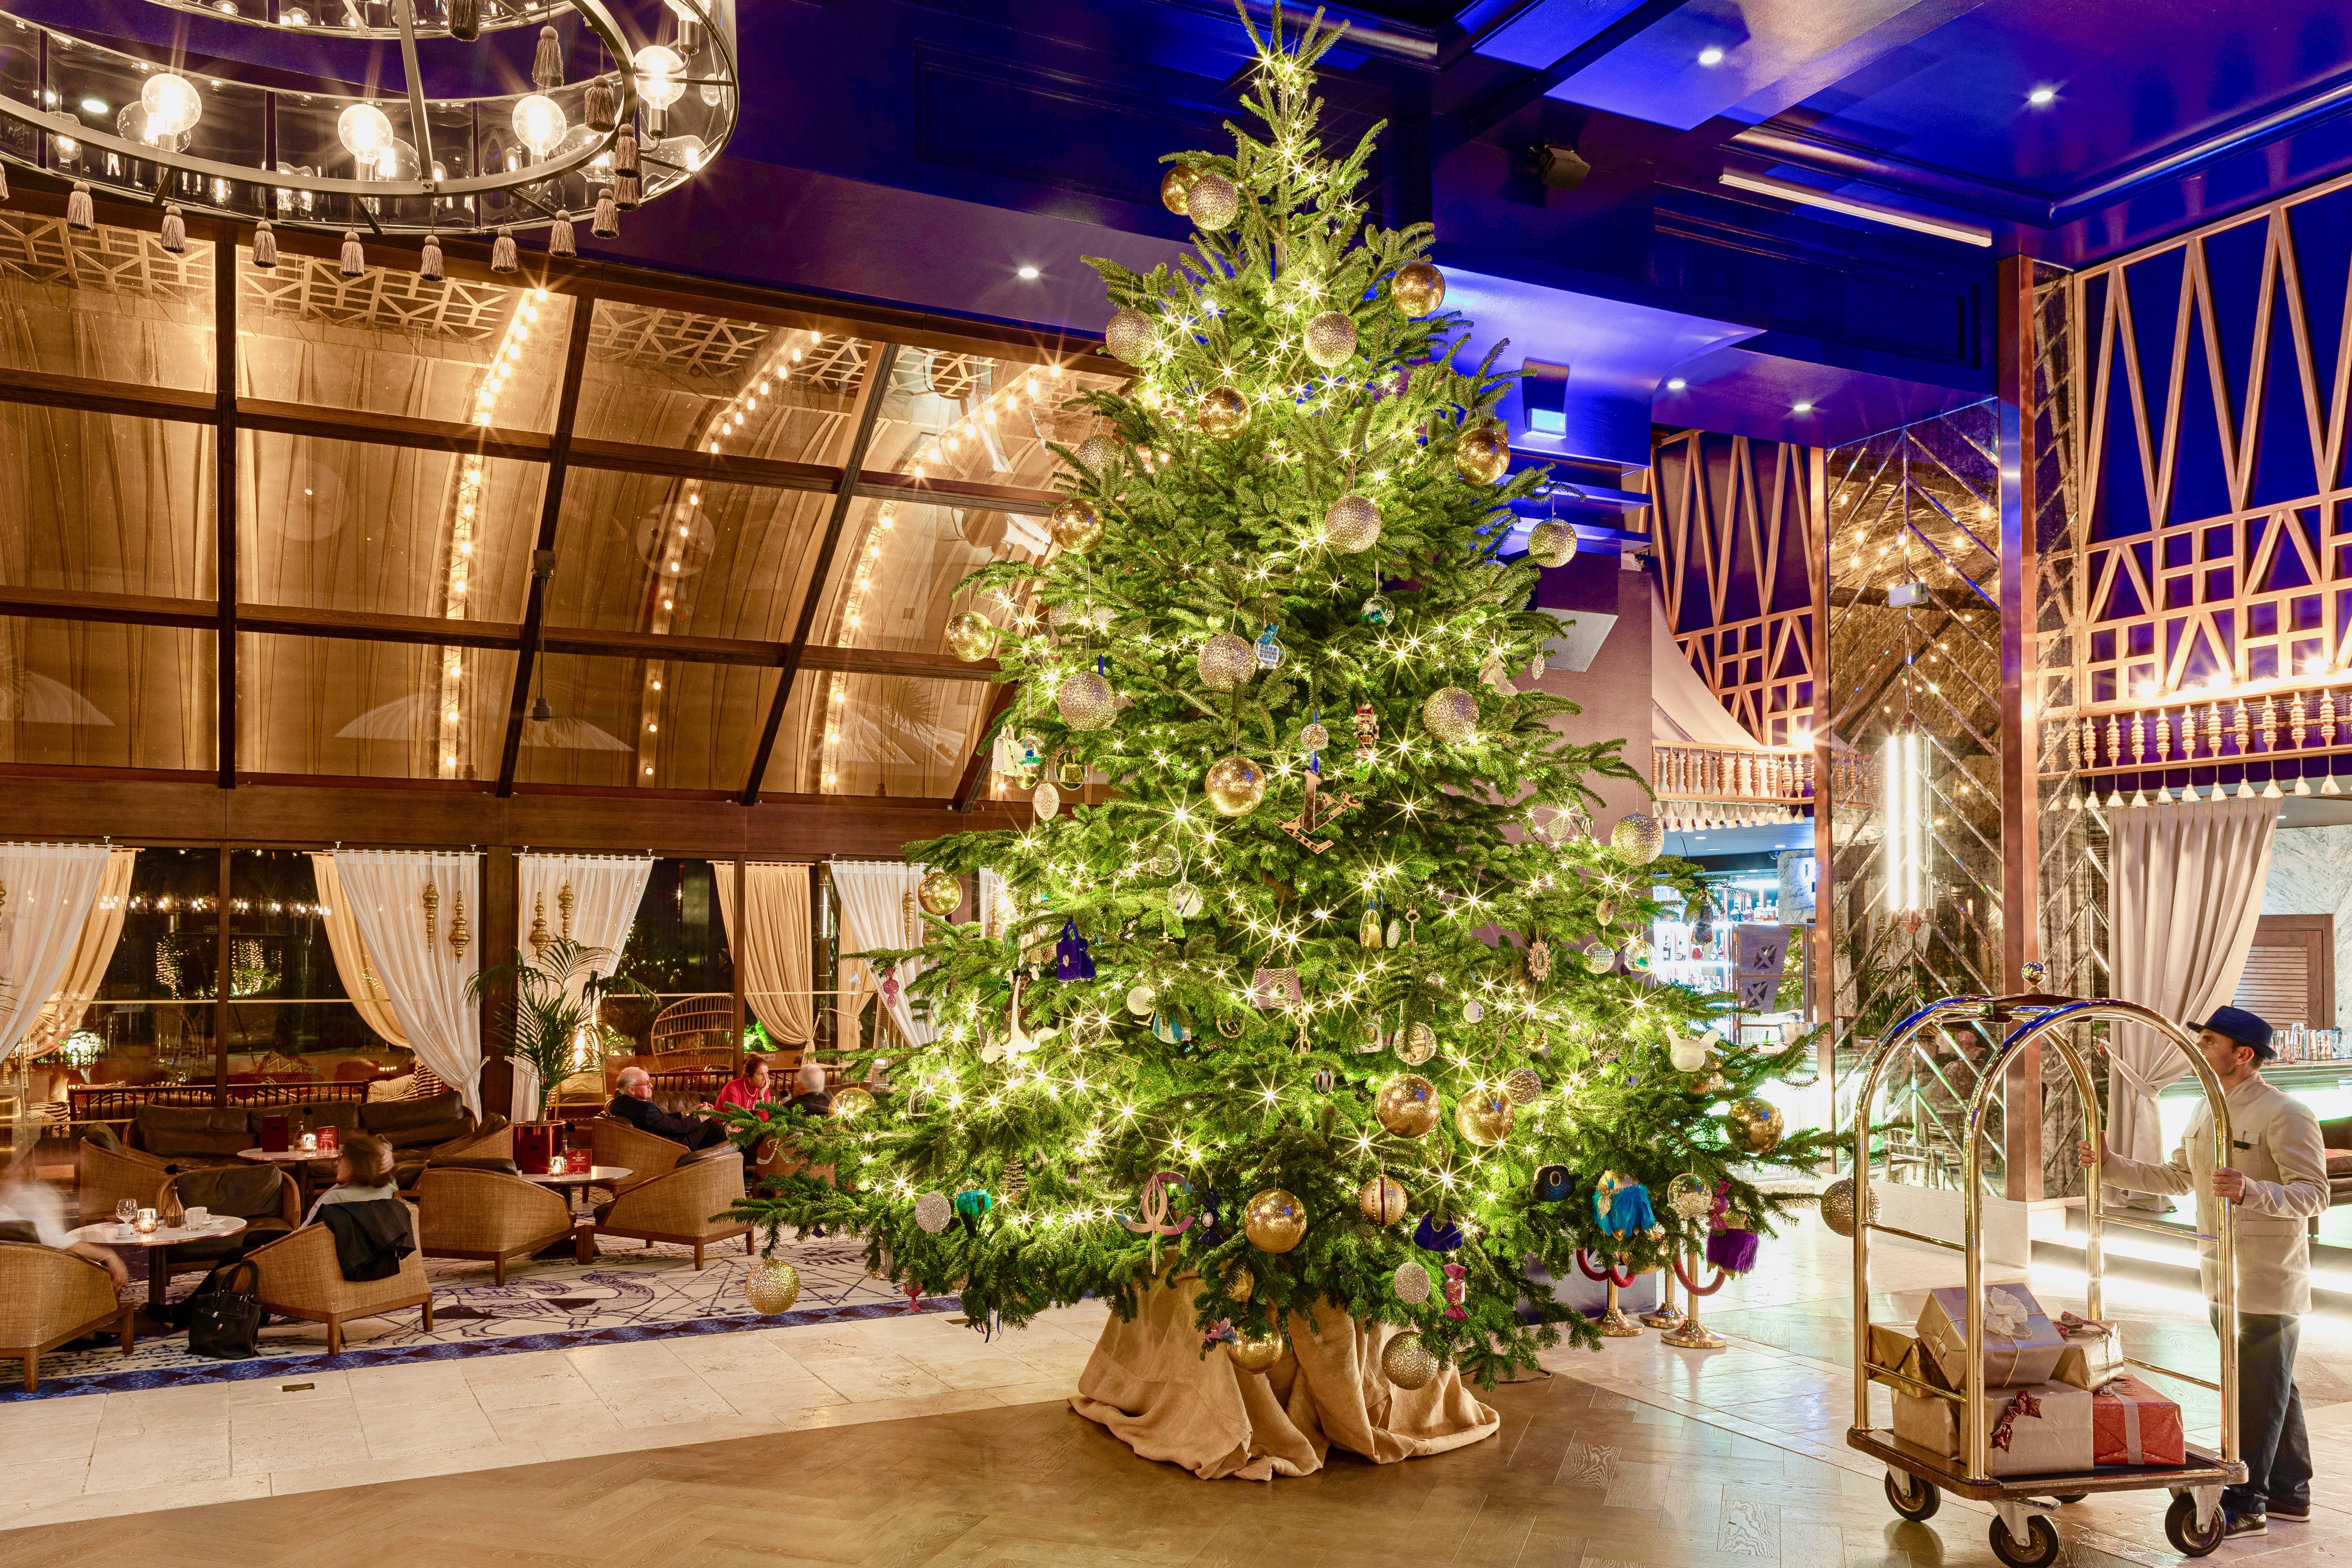 The world’s most expensive Christmas tree – the 19-foot spruce tree from British designer and diamond artist Debbie Wingham is decorated with ornaments totalling HK$122.6 million (US$15.7 million). Photos: Handouts